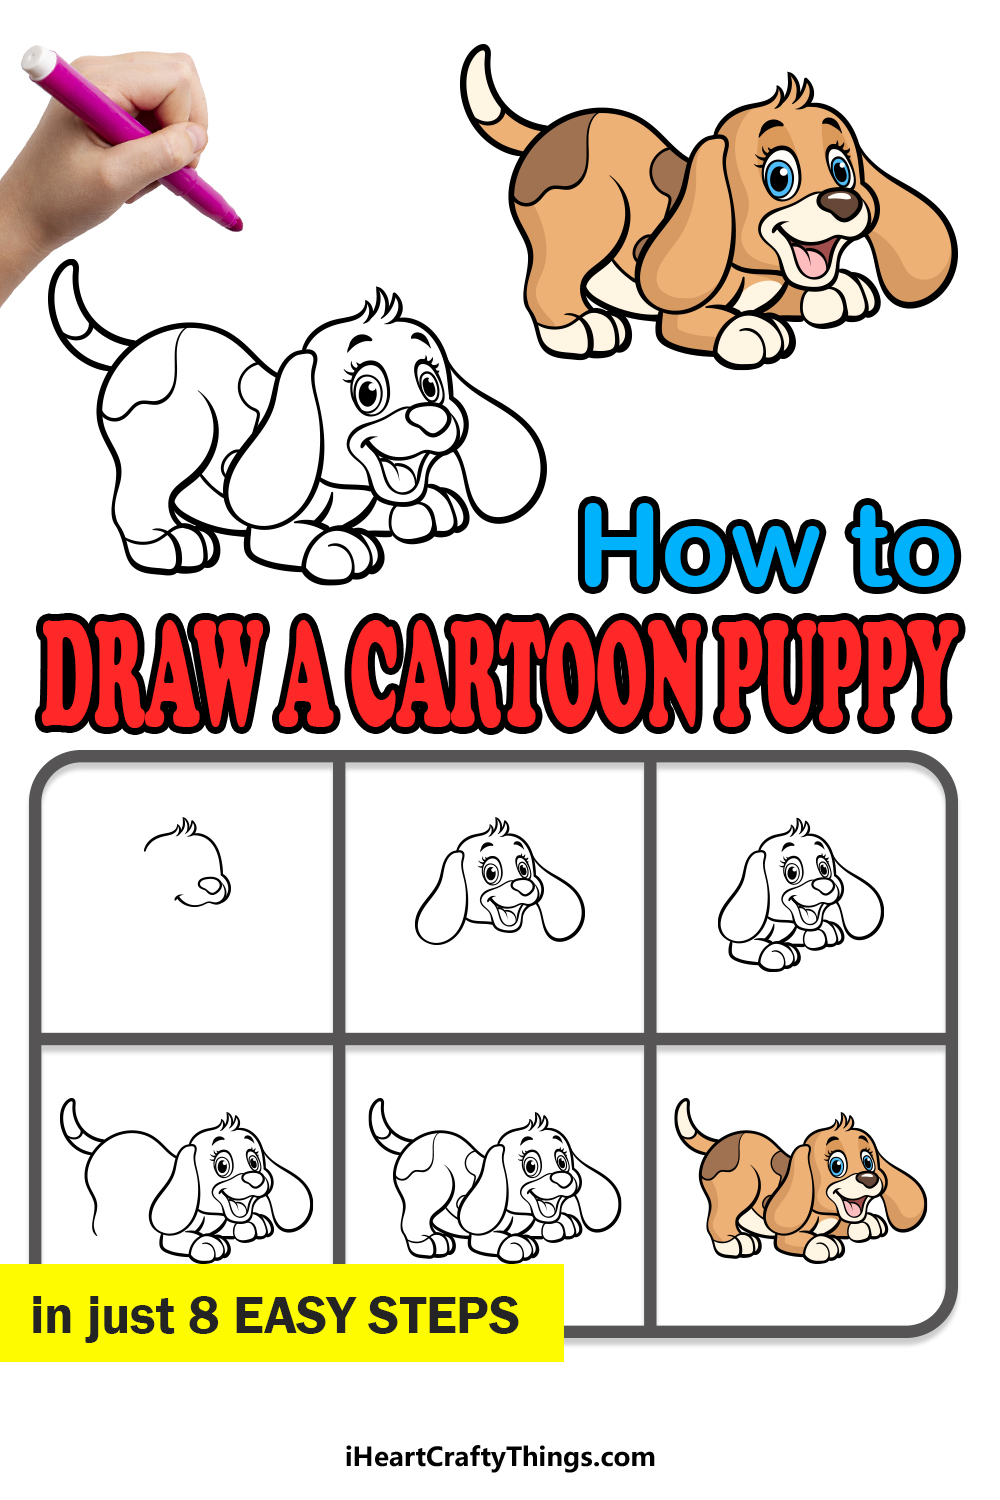 how to draw a cartoon puppy in 8 easy steps